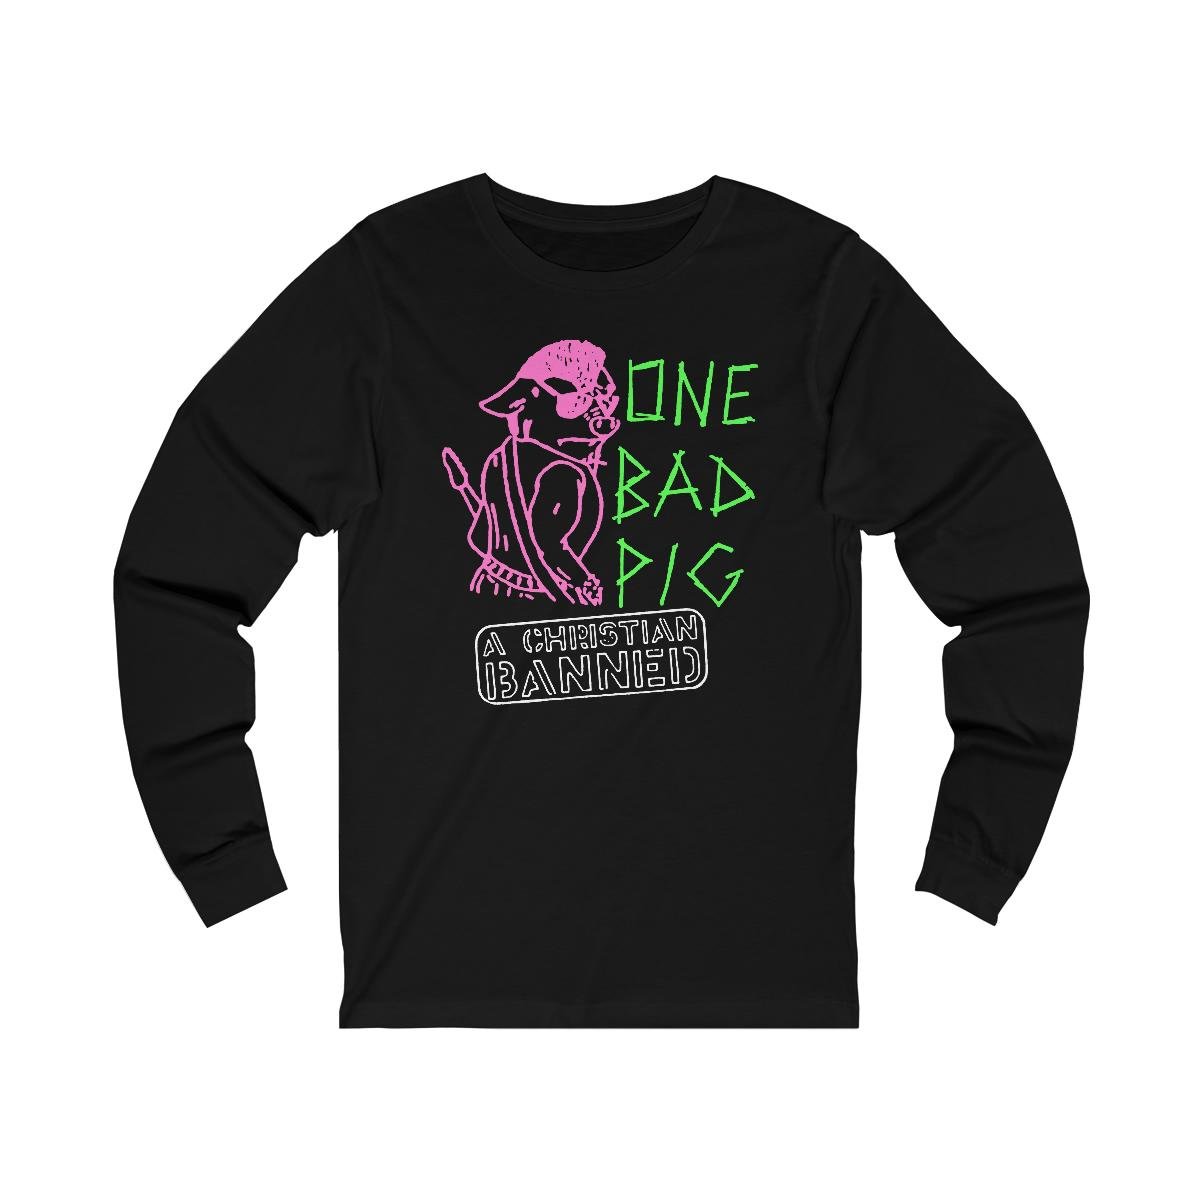 One Bad Pig – A Christian Banned Long Sleeve Tshirt